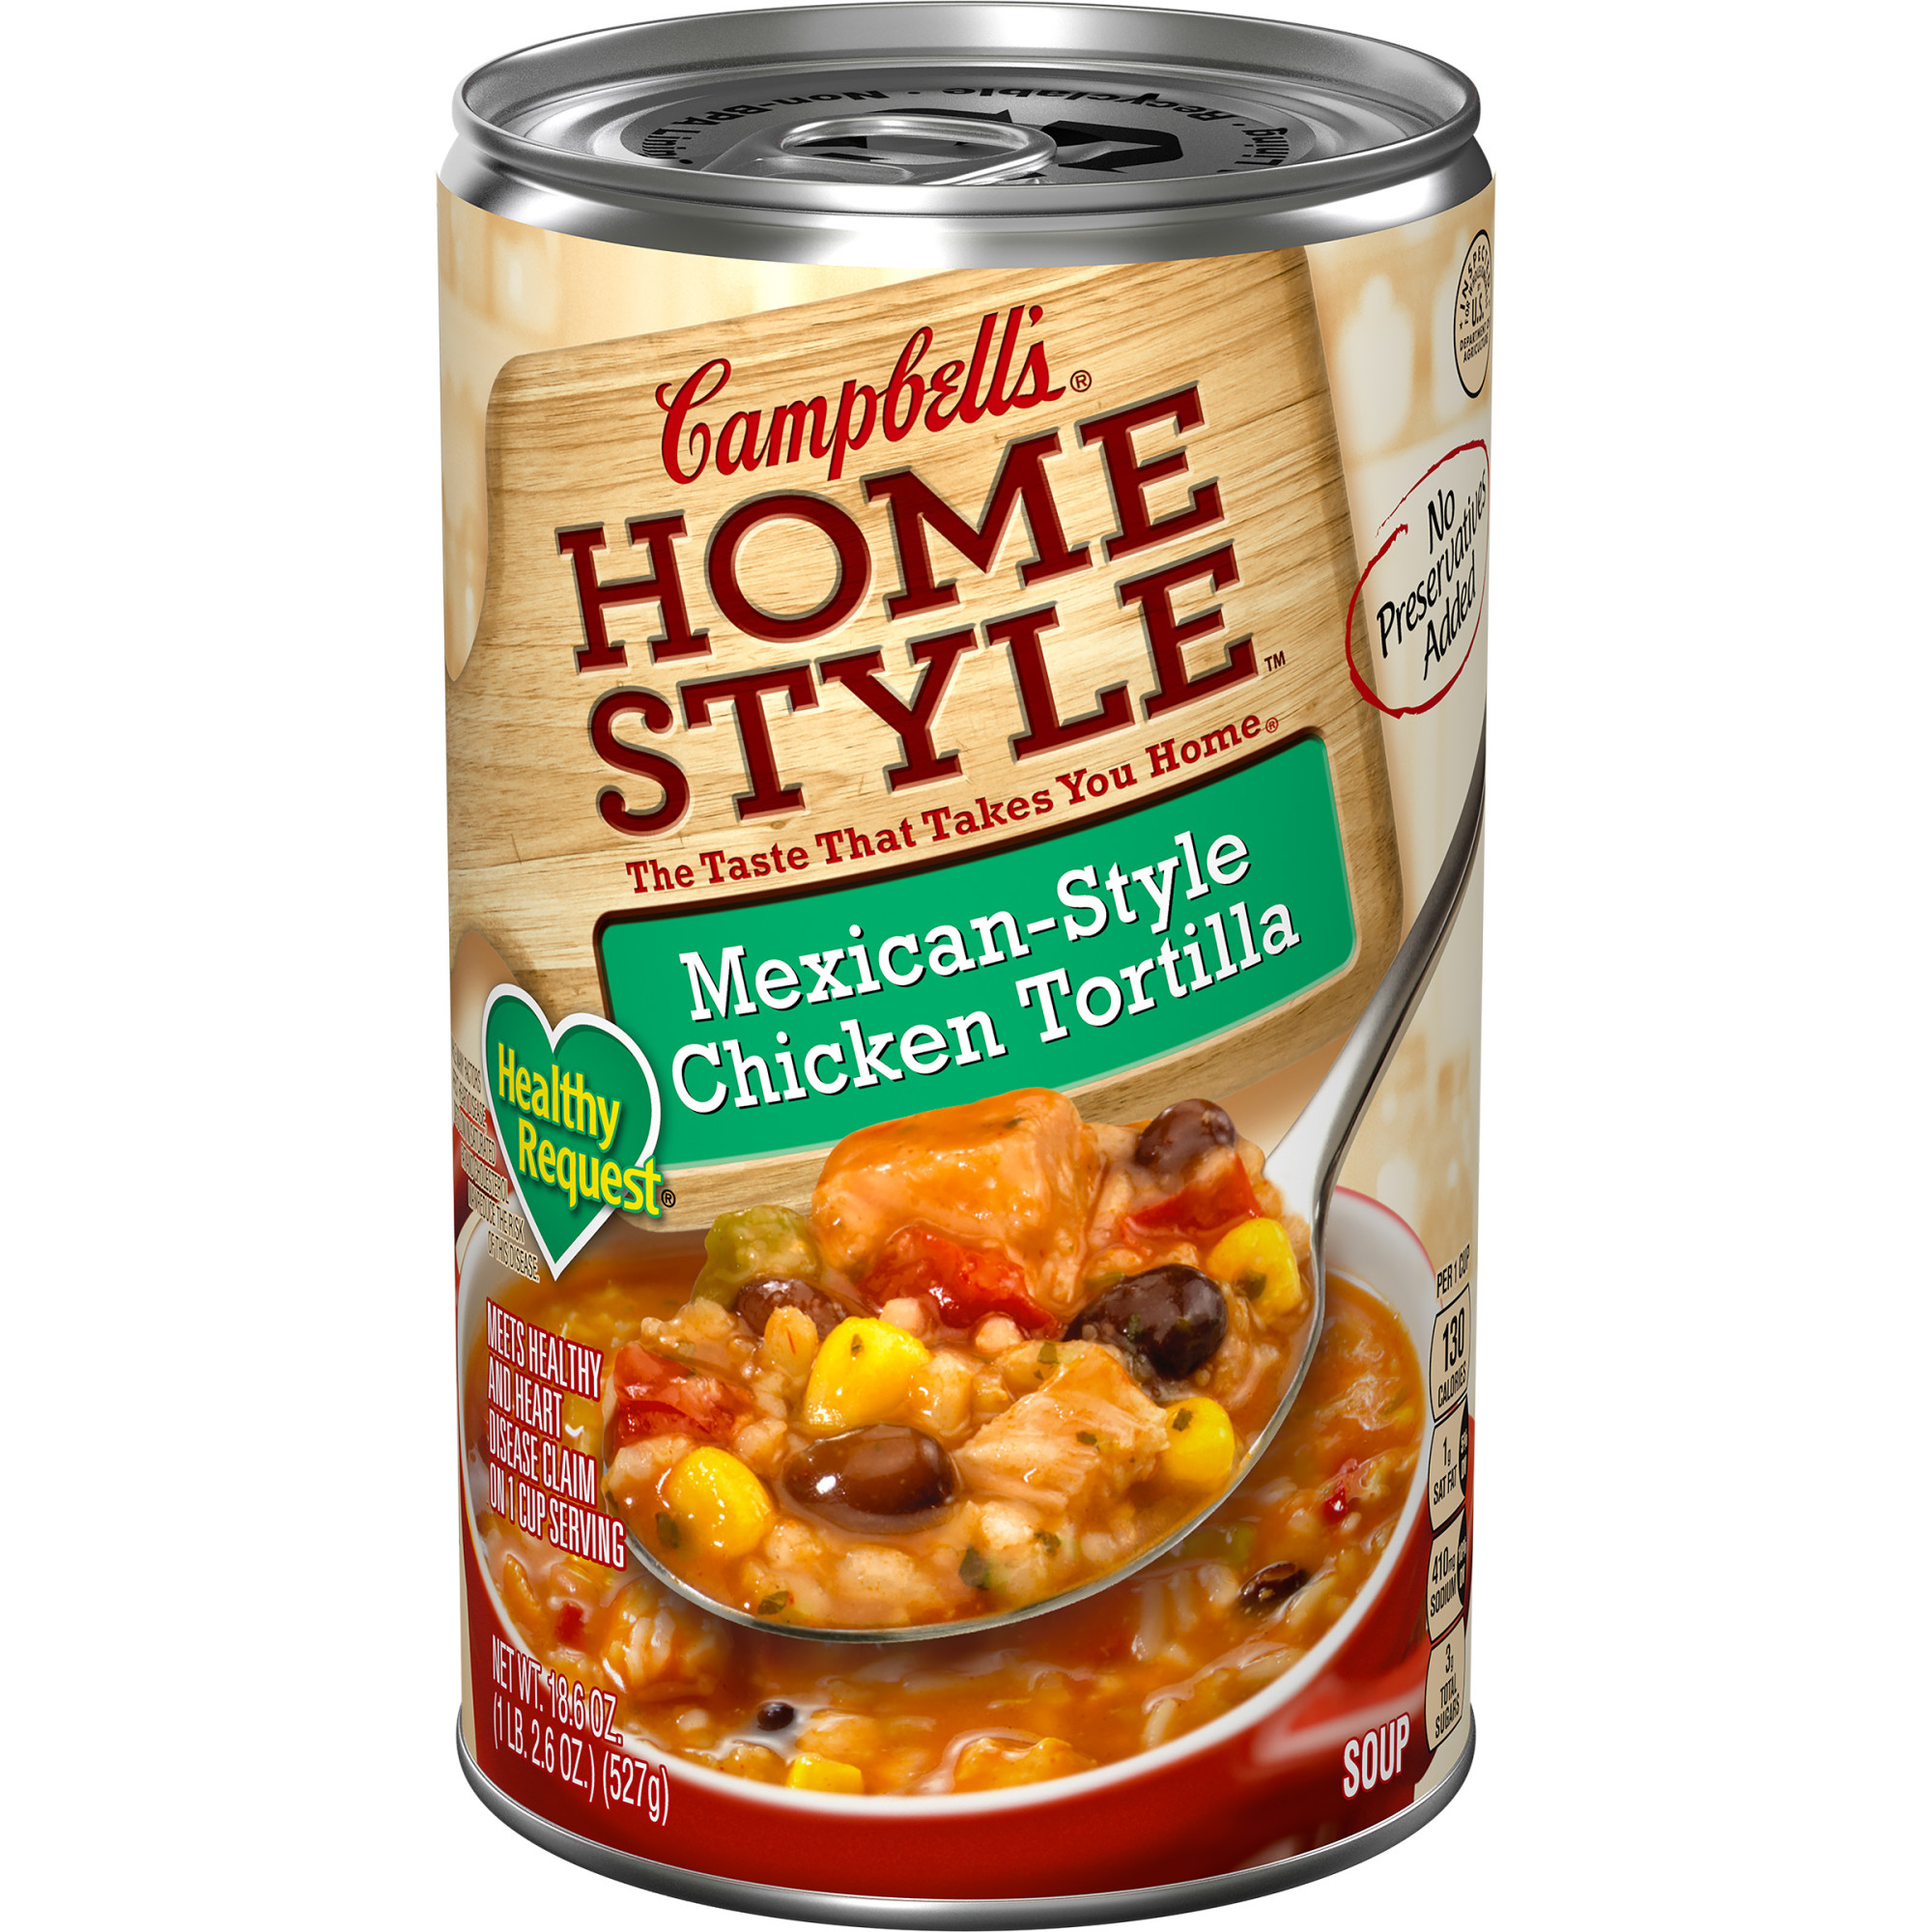 Campbell’s Homestyle Healthy Request Soup, Mexican Style Chicken Tortilla Soup, 18.6 oz Can - image 1 of 14